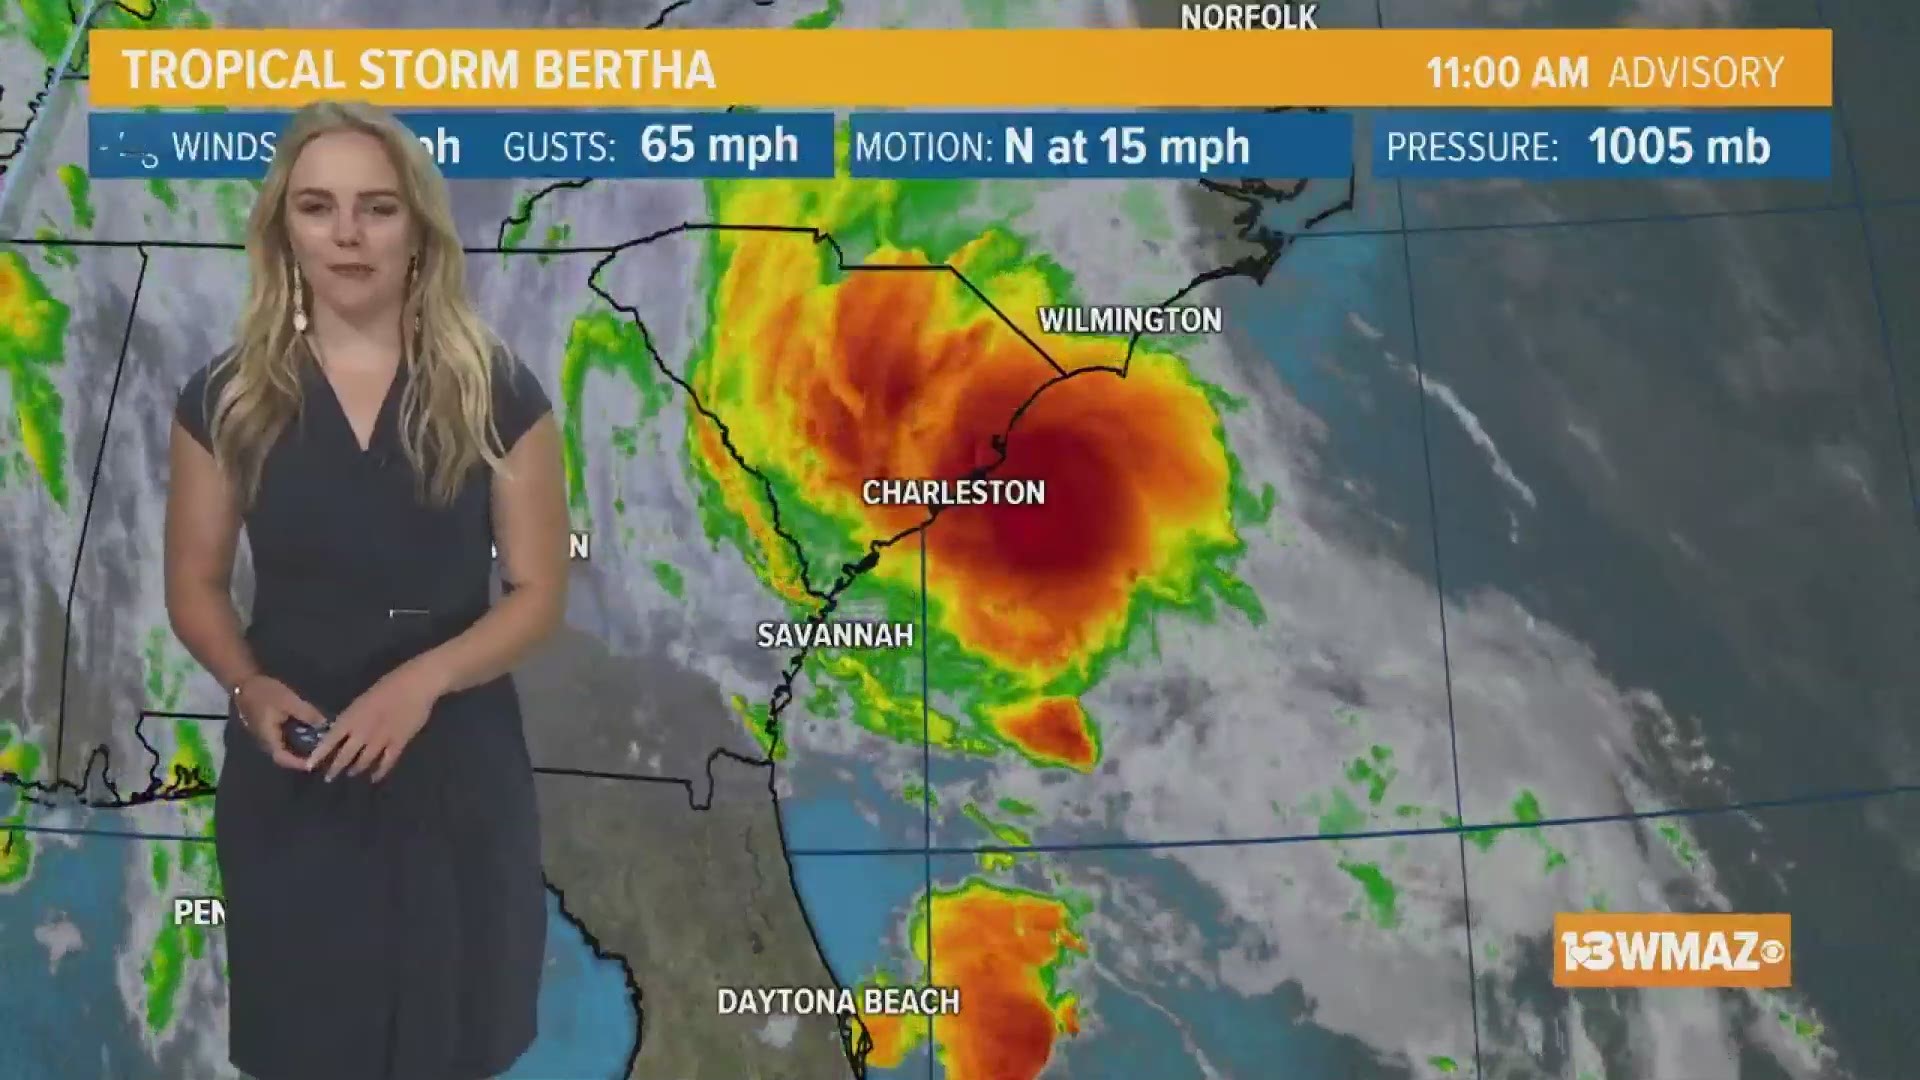 Tropical Depression Bertha continues through the Carolinas after becoming a tropical storm earlier Wednesday. Courteney Jacobazzi has more on the progression.